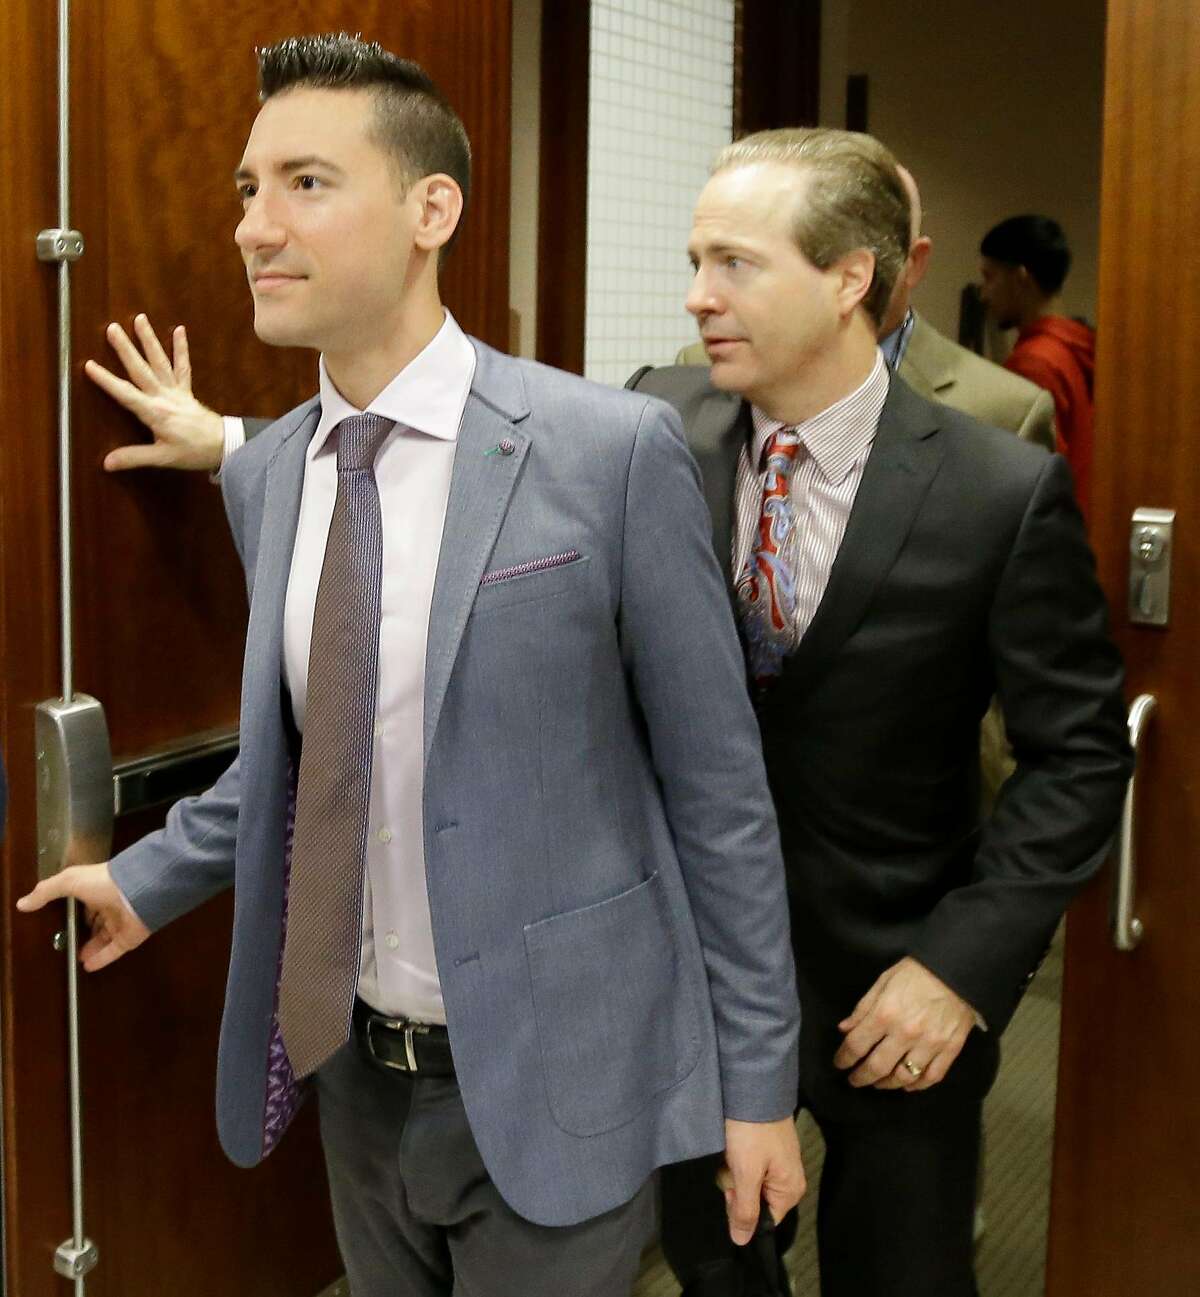 David Daleiden, left, leaves with his attorney Jared Woodfill from the 338th District Court at the Criminal Courthouse, 1201 Franklin, he was indicted in February on charges of tampering with a governmental record shown Friday, April 29, 2016, in Houston. The case stems from secret videotaping of Planned Parenthood employees. ( Melissa Phillip / Houston Chronicle )